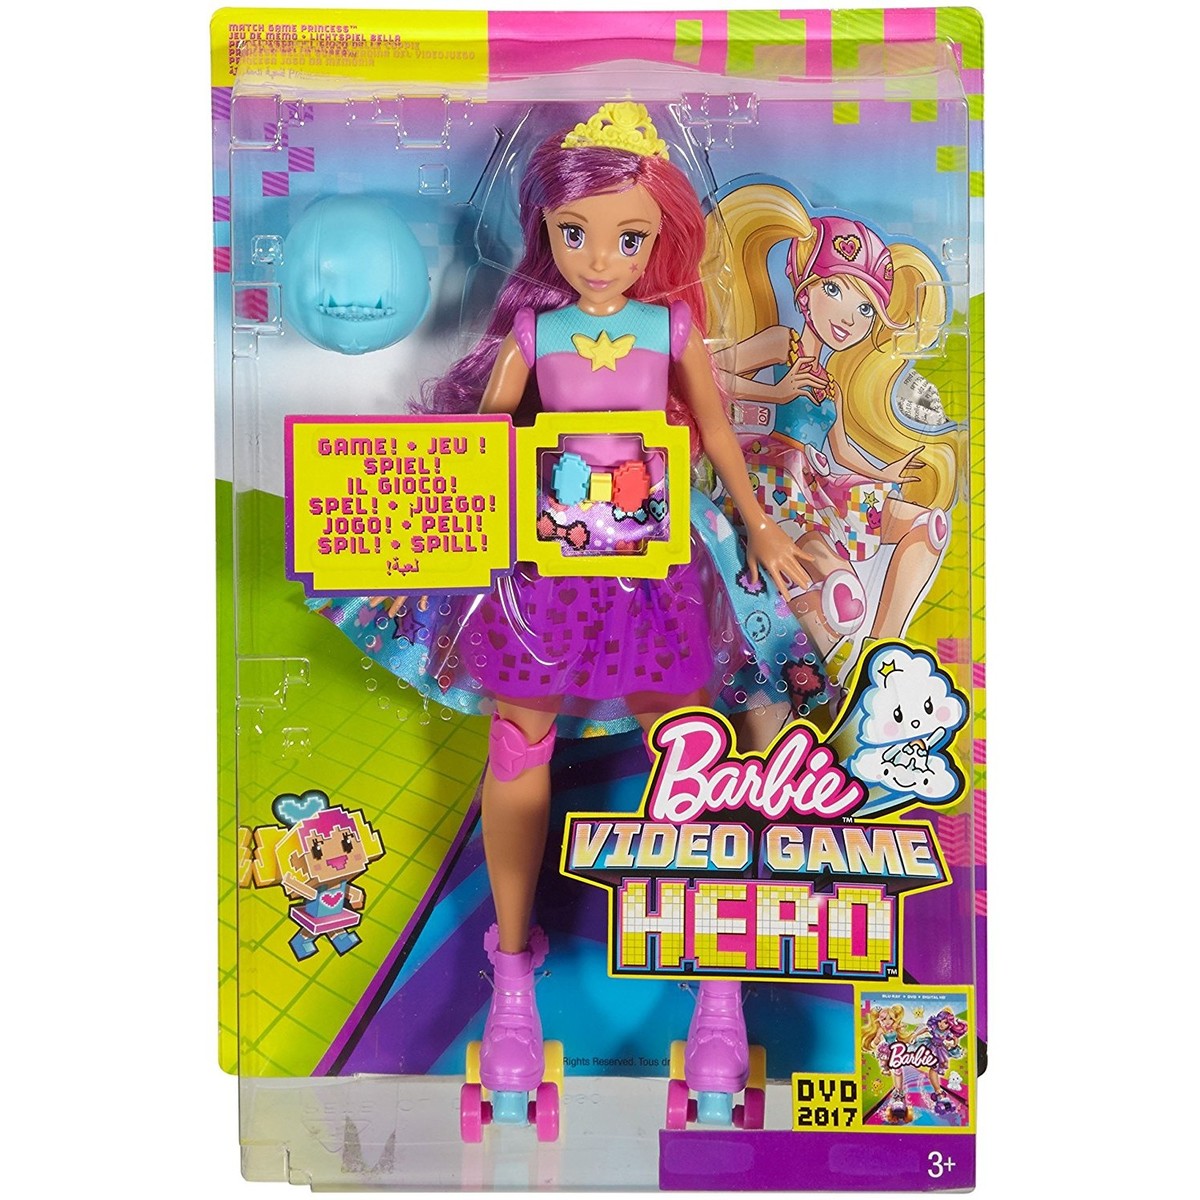 Barbie Video Game Hero Match Game Princess Doll, Pink DTW00